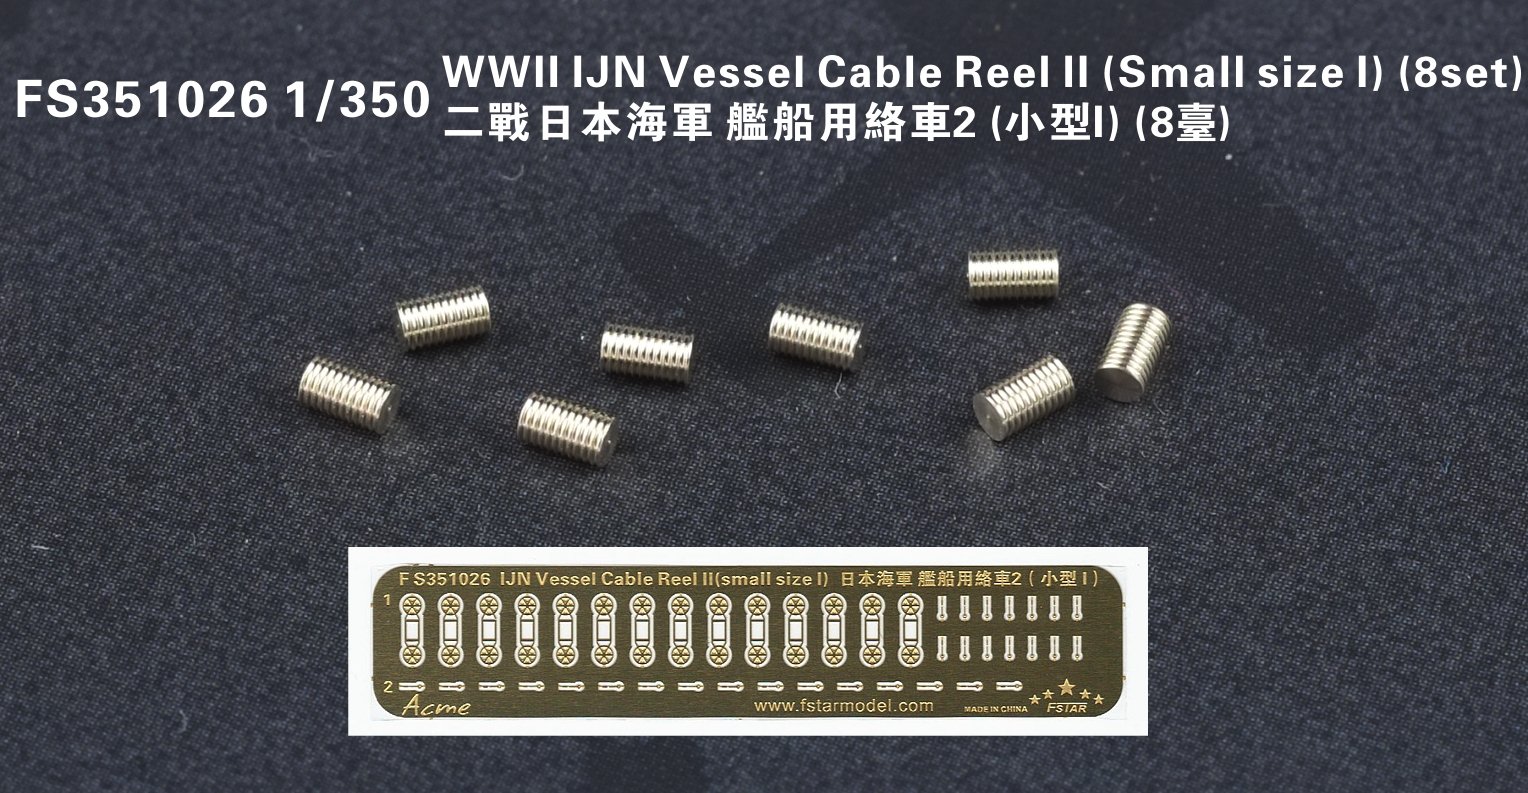 1/350 WWII IJN Vessel Cable Reel #2 (Small Size #1) (8 Set) - Click Image to Close